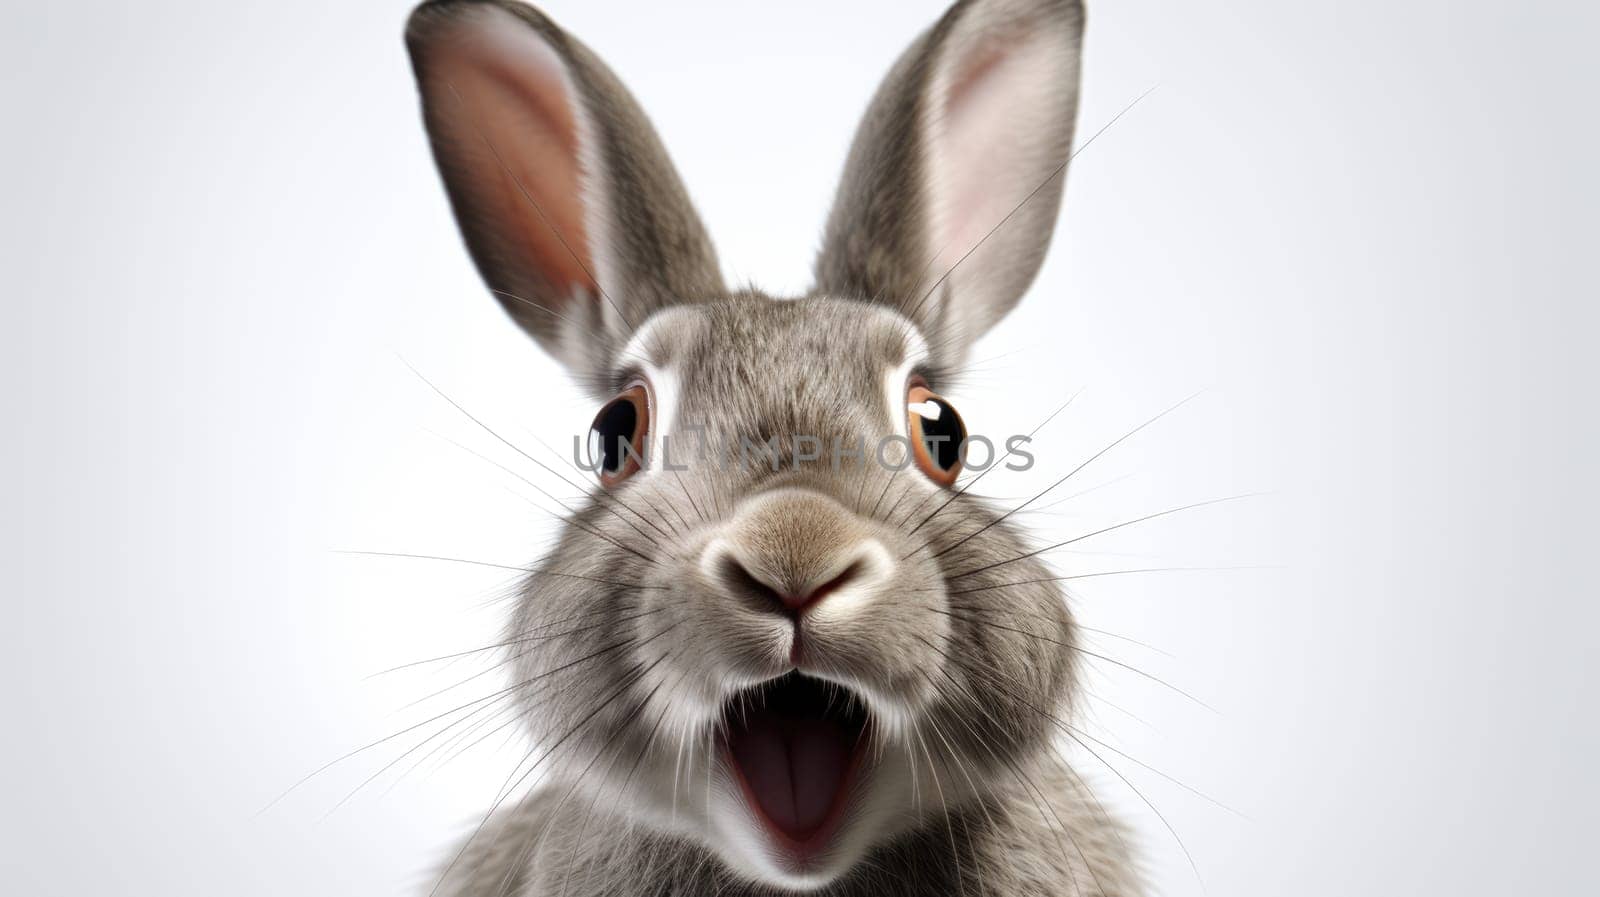 Funny Gray Rabbit with Big Eyes on Light Gray Background, Cute Animal Portrait by JuliaDorian